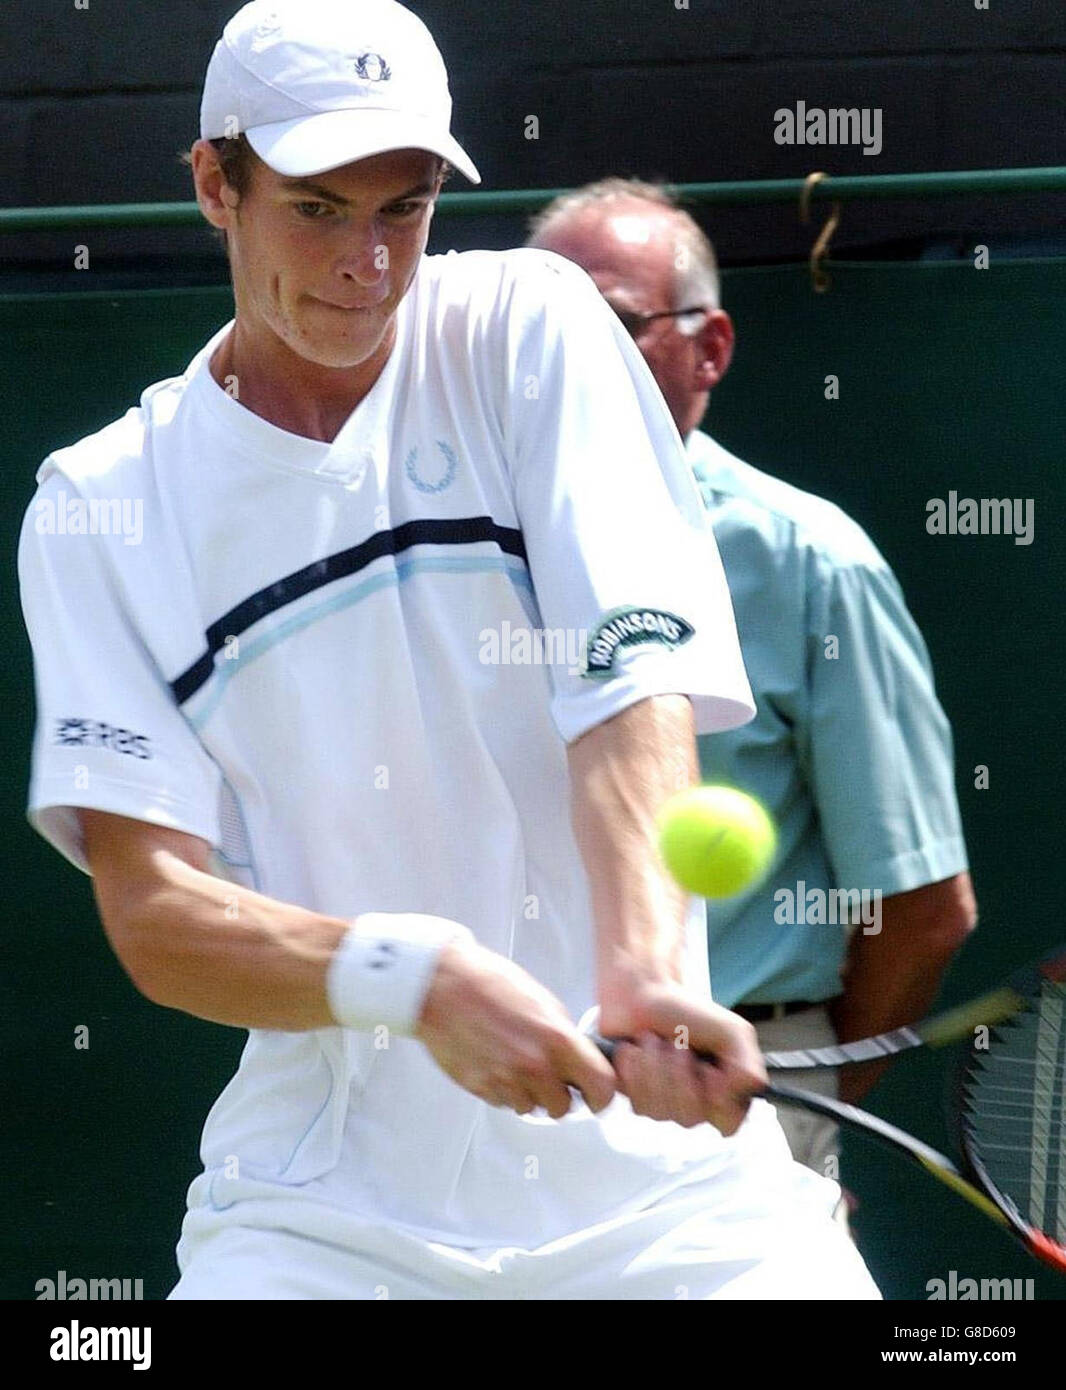 Tennis - Wimbledon Championships 2005 - Men's First Round - Andy Murray v George Bastl - All England Club. Great Britain's Andrew Murray. Stock Photo